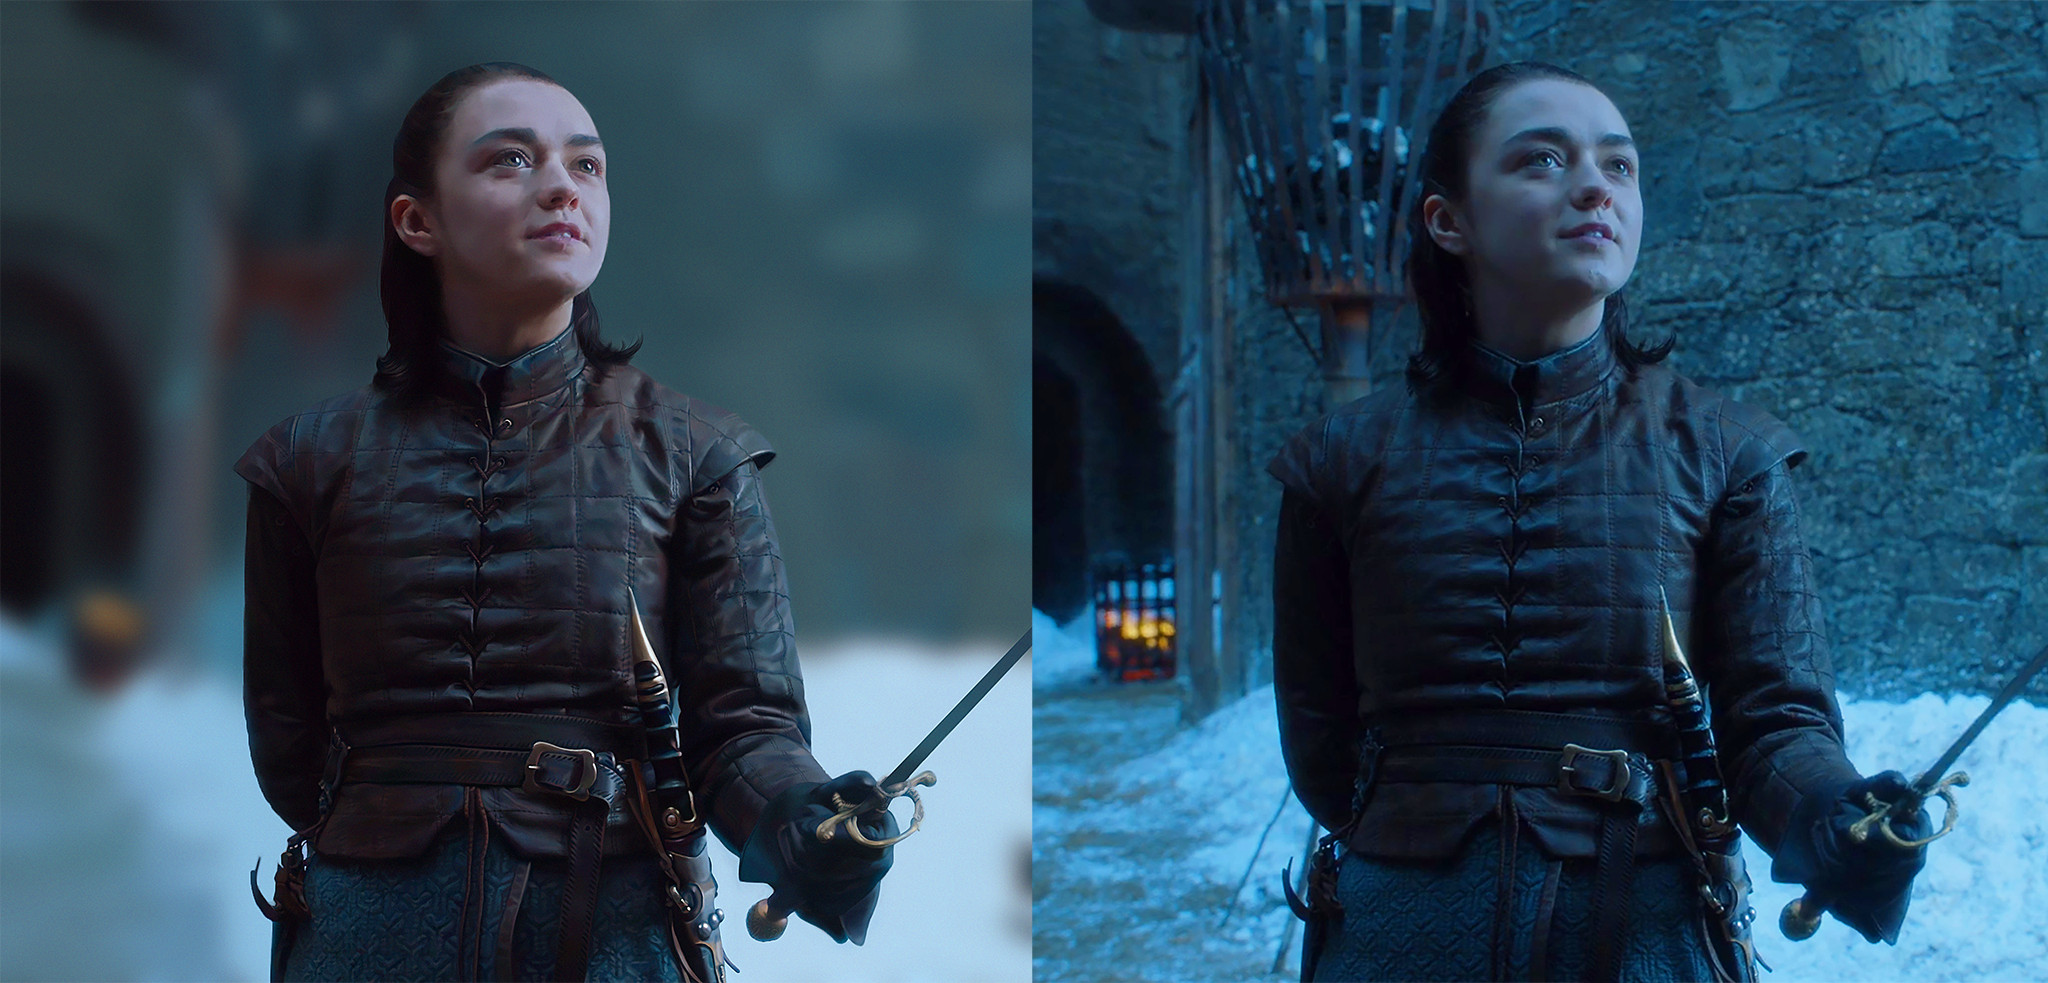 Painting vs. Reference screenshot, from Game of Thrones S07 E04